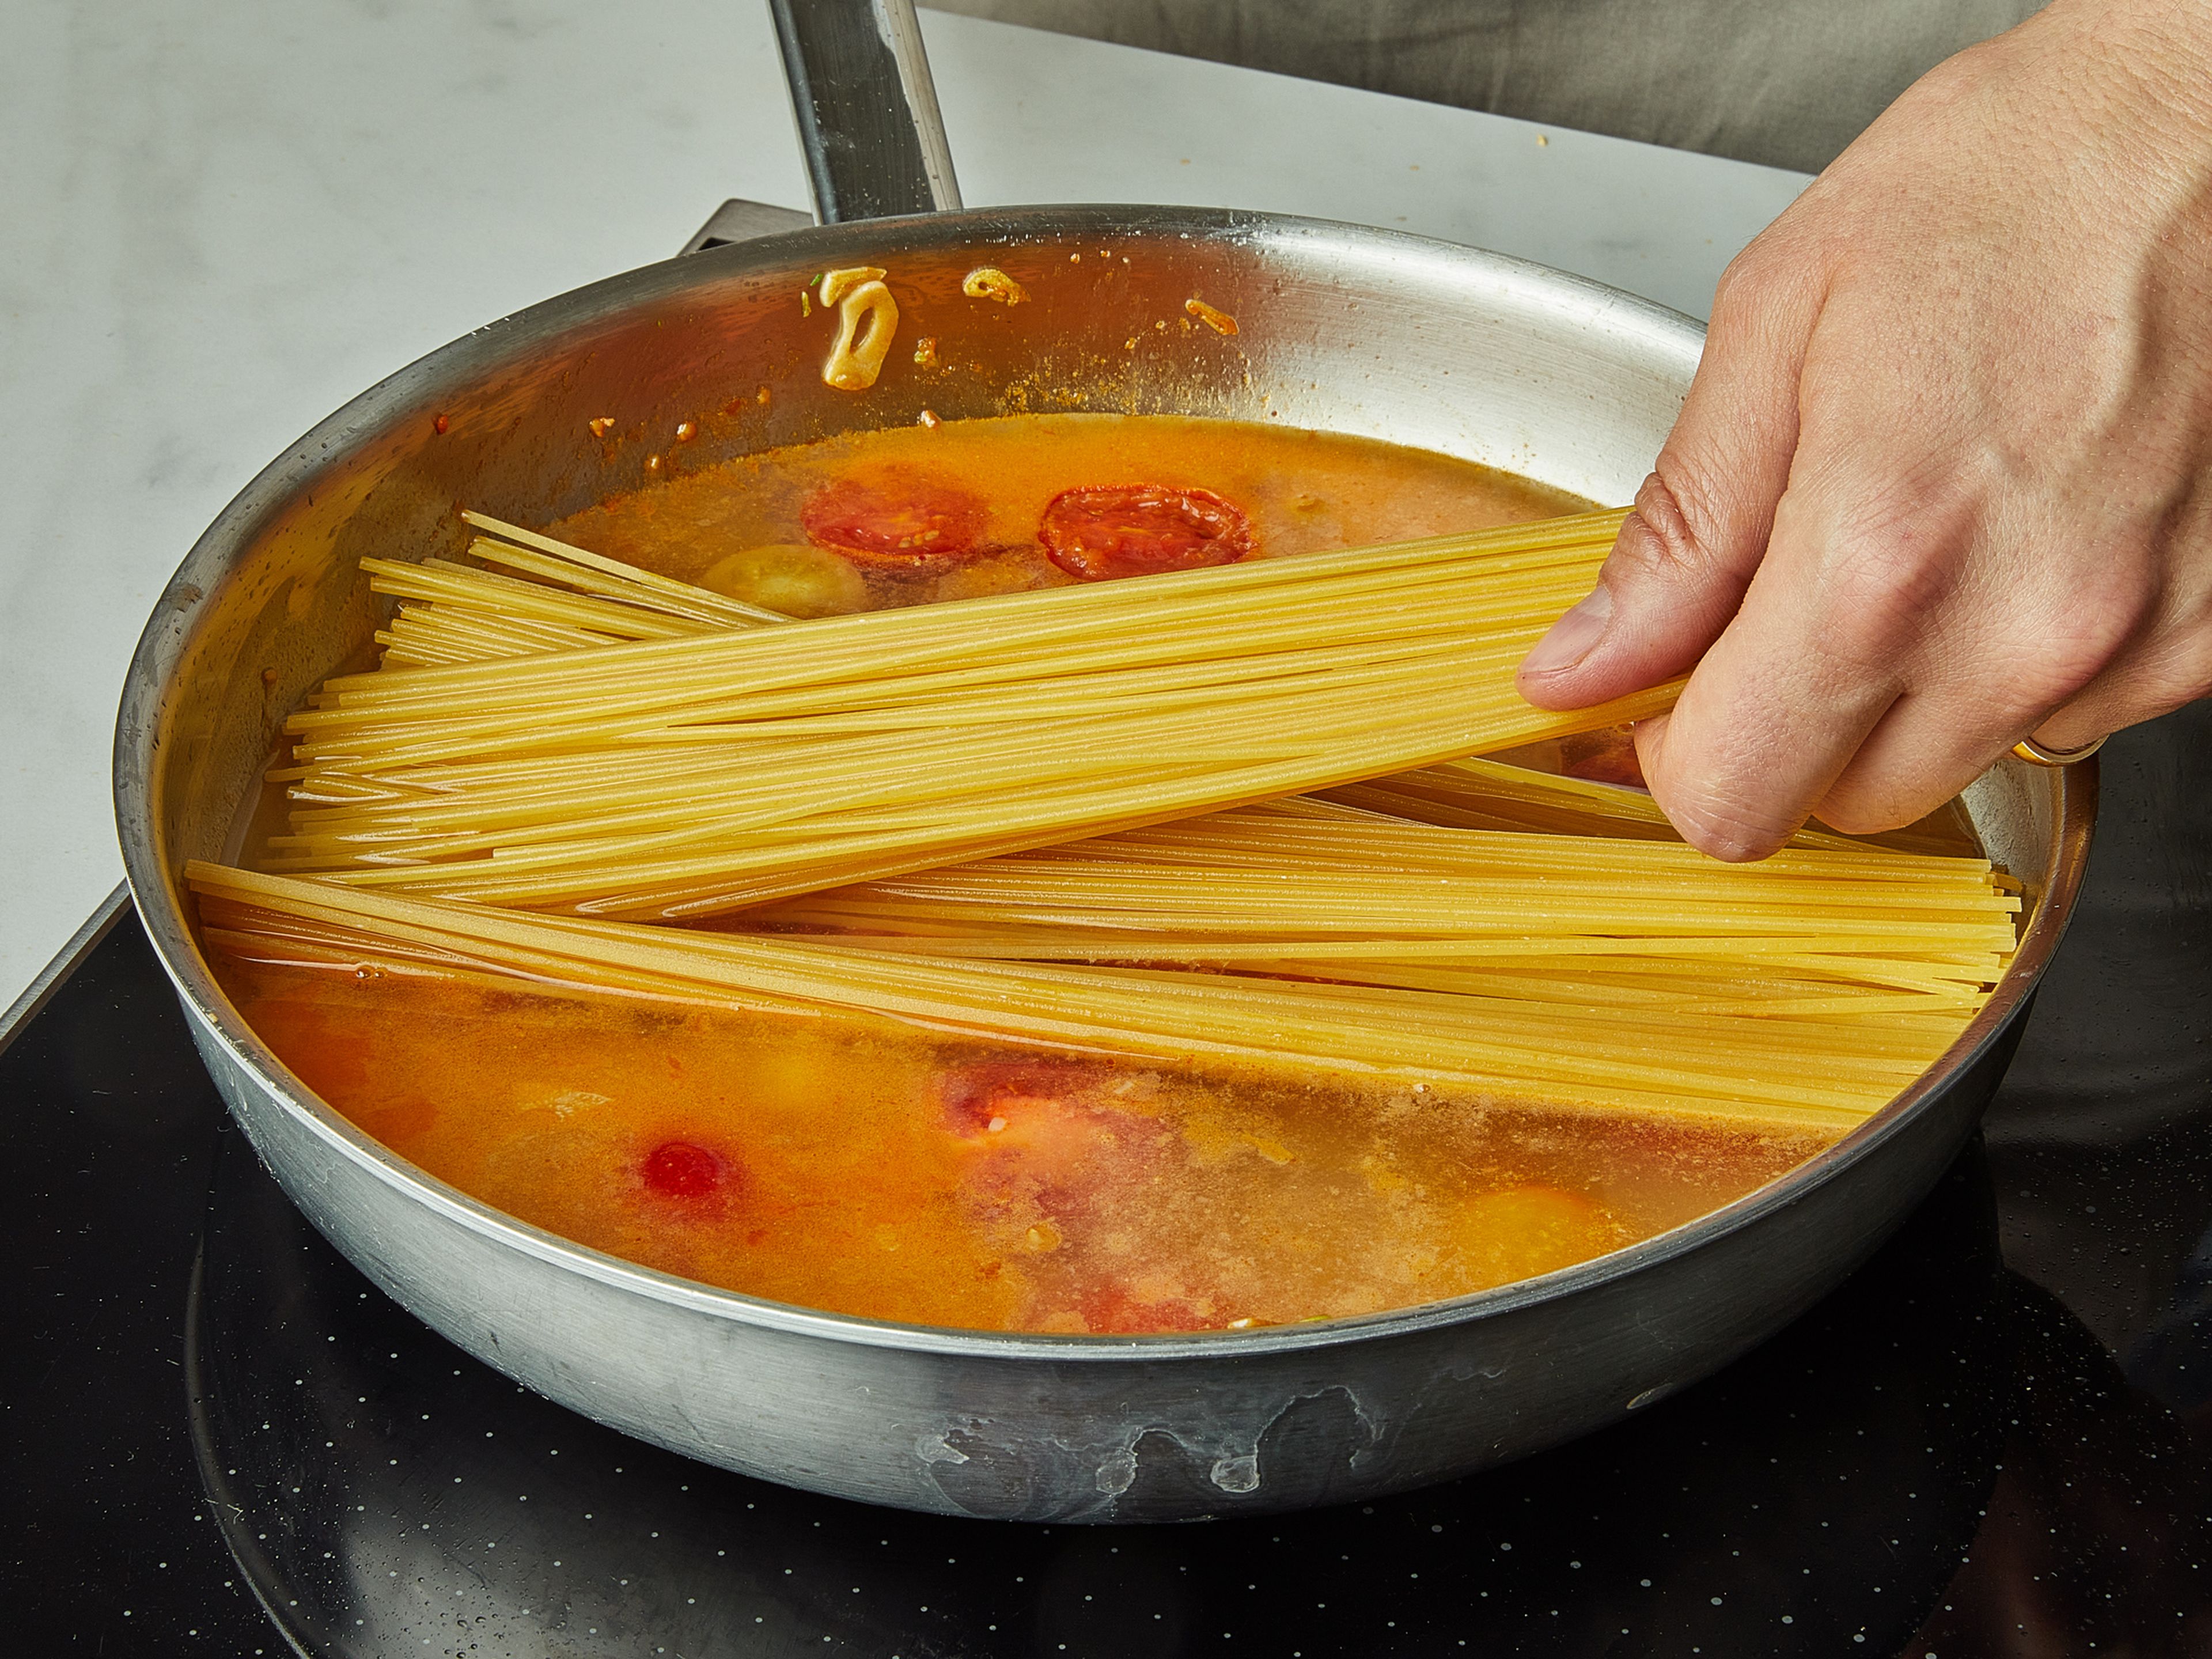 Add spaghetti to the pan, and add the water. The pasta should be completely covered with water. Season the water with salt. Put the lid on and simmer for approx. 9 min. Mix everything after a few minutes, so that it doesn't stick together, add more salt to your taste.